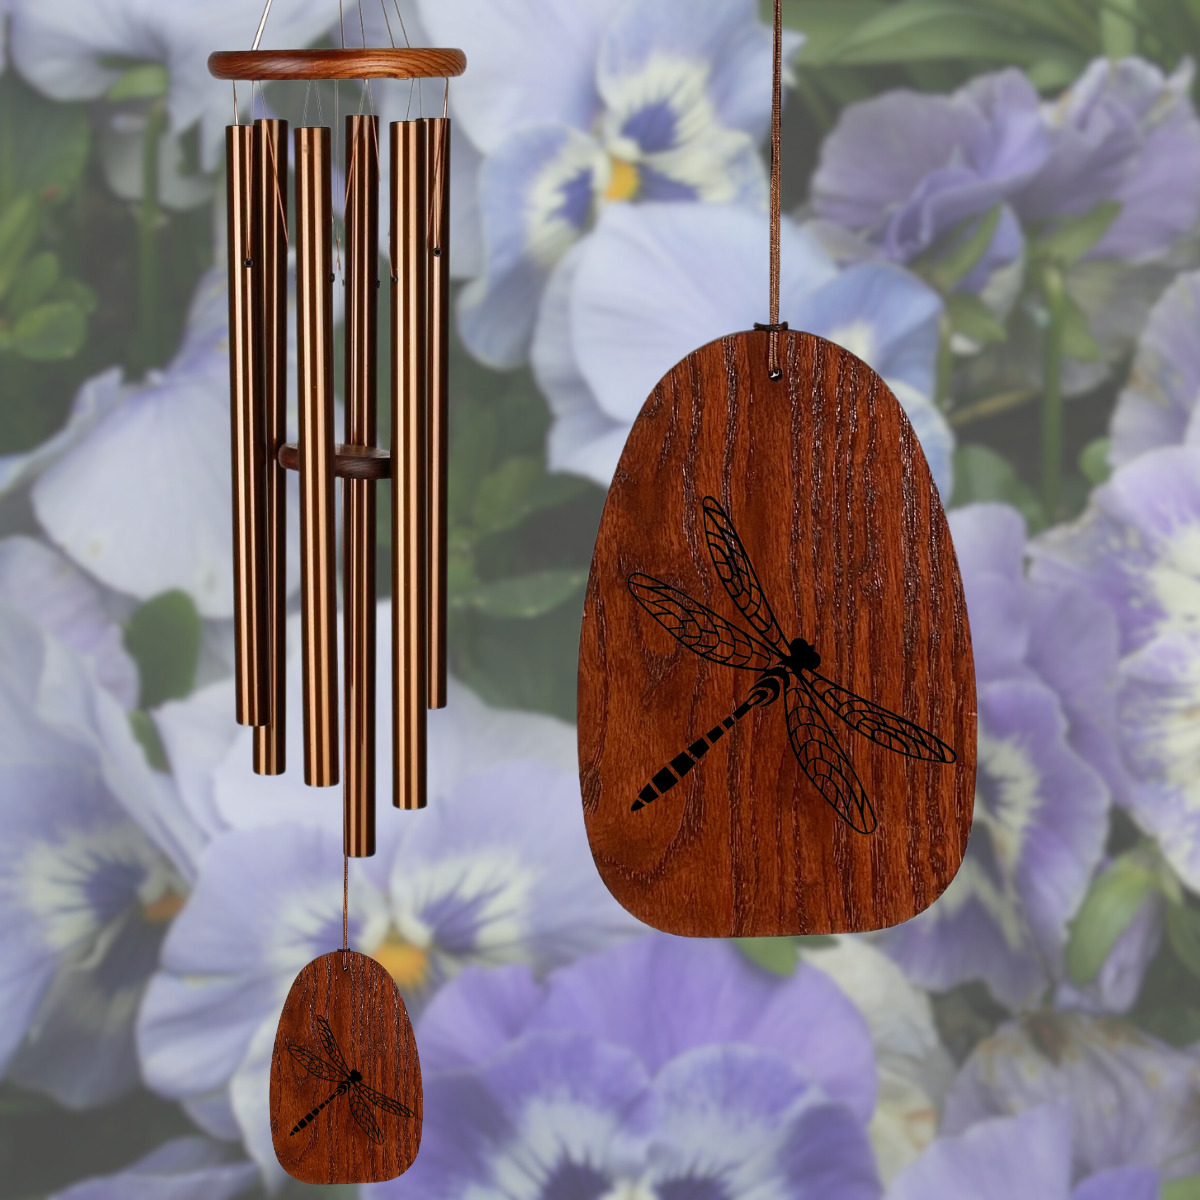 Amazing Grace 40 Inch Wind Chime - Engravable Dragonfly Sail - Bronze